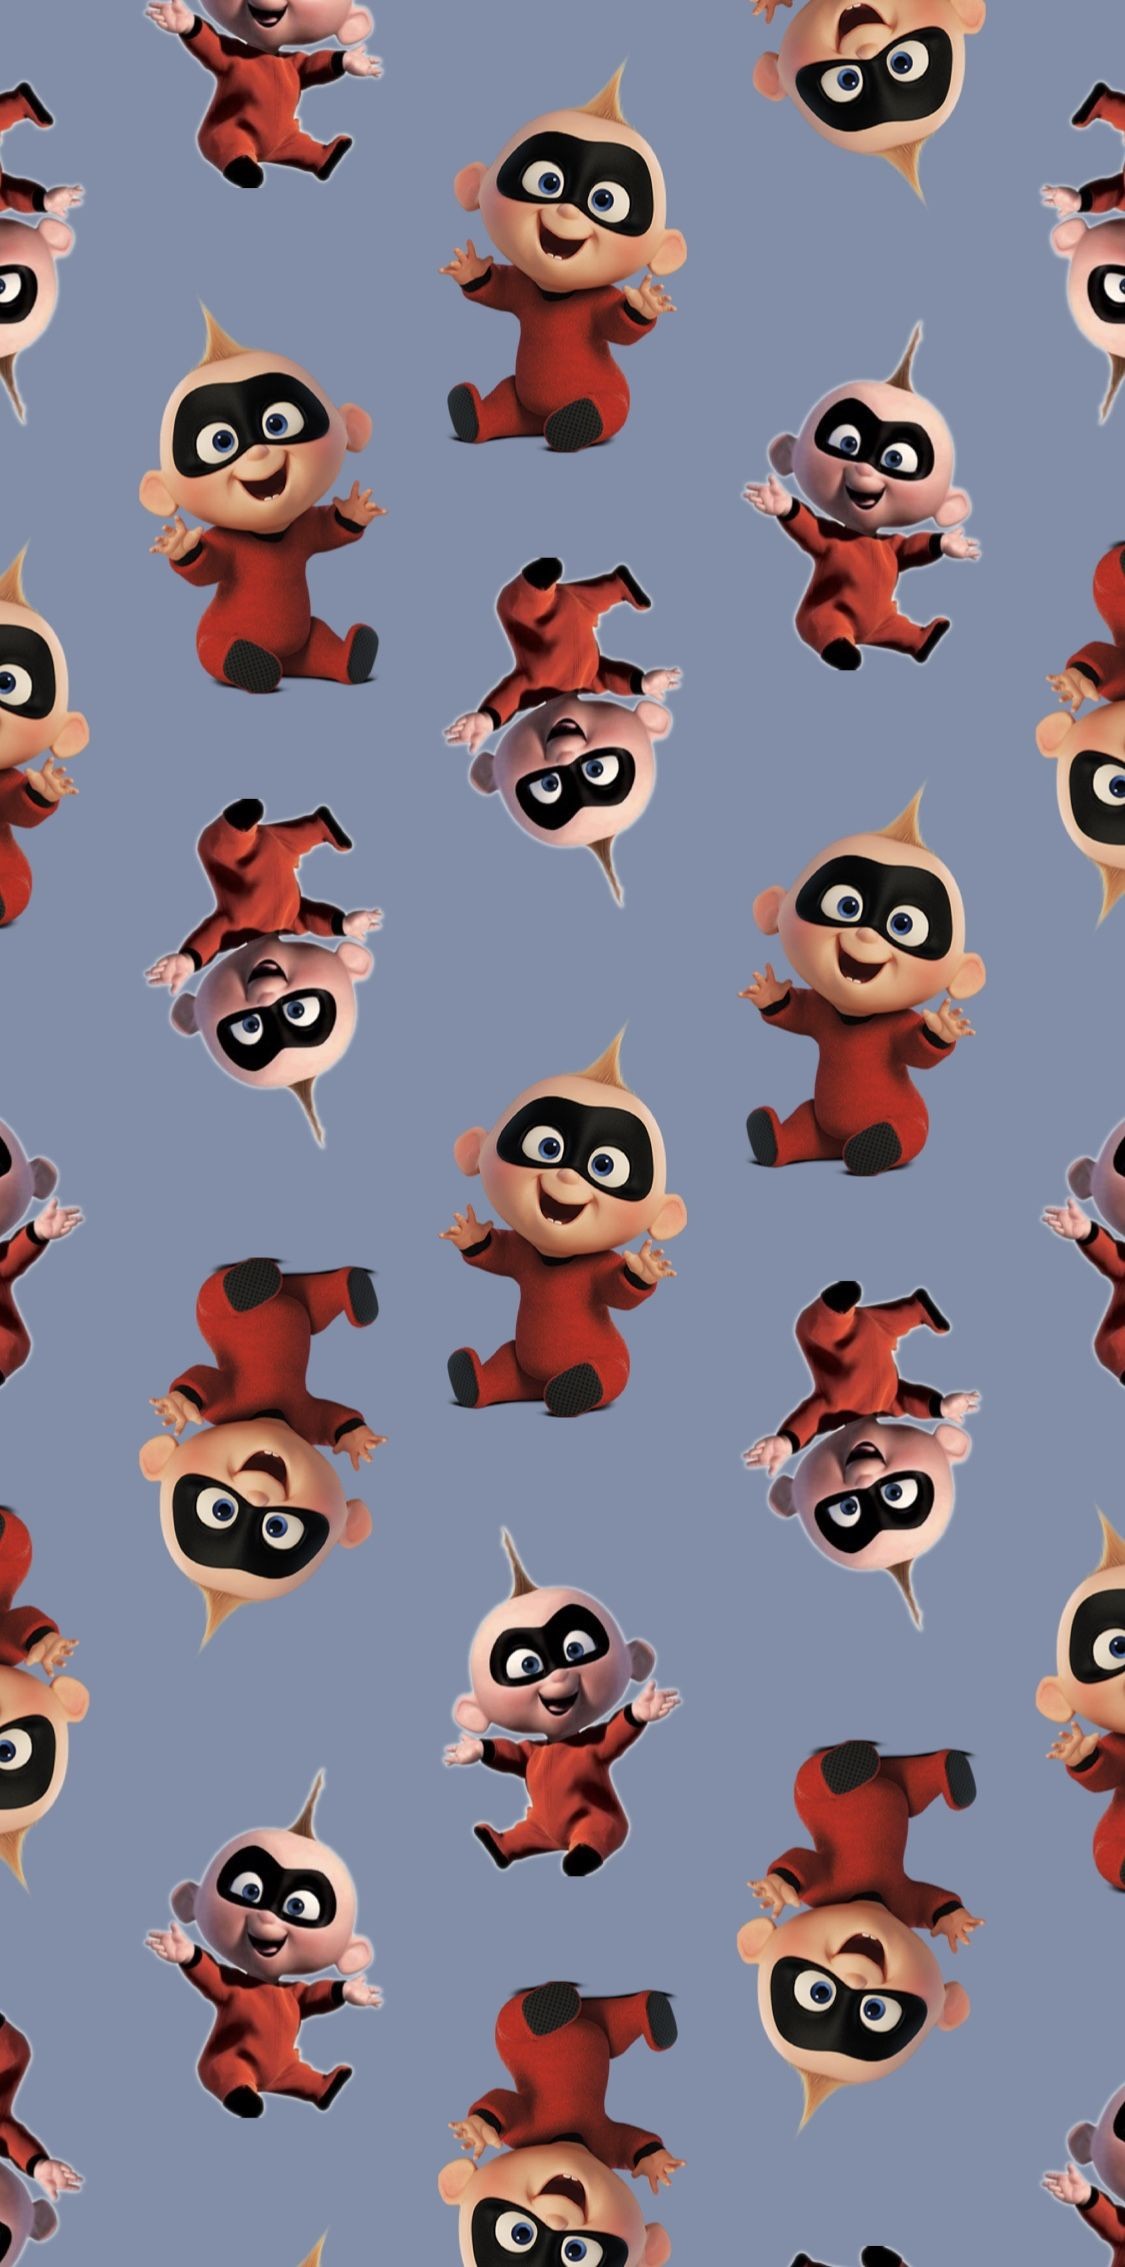 The Incredibles Wallpapers 28 images inside